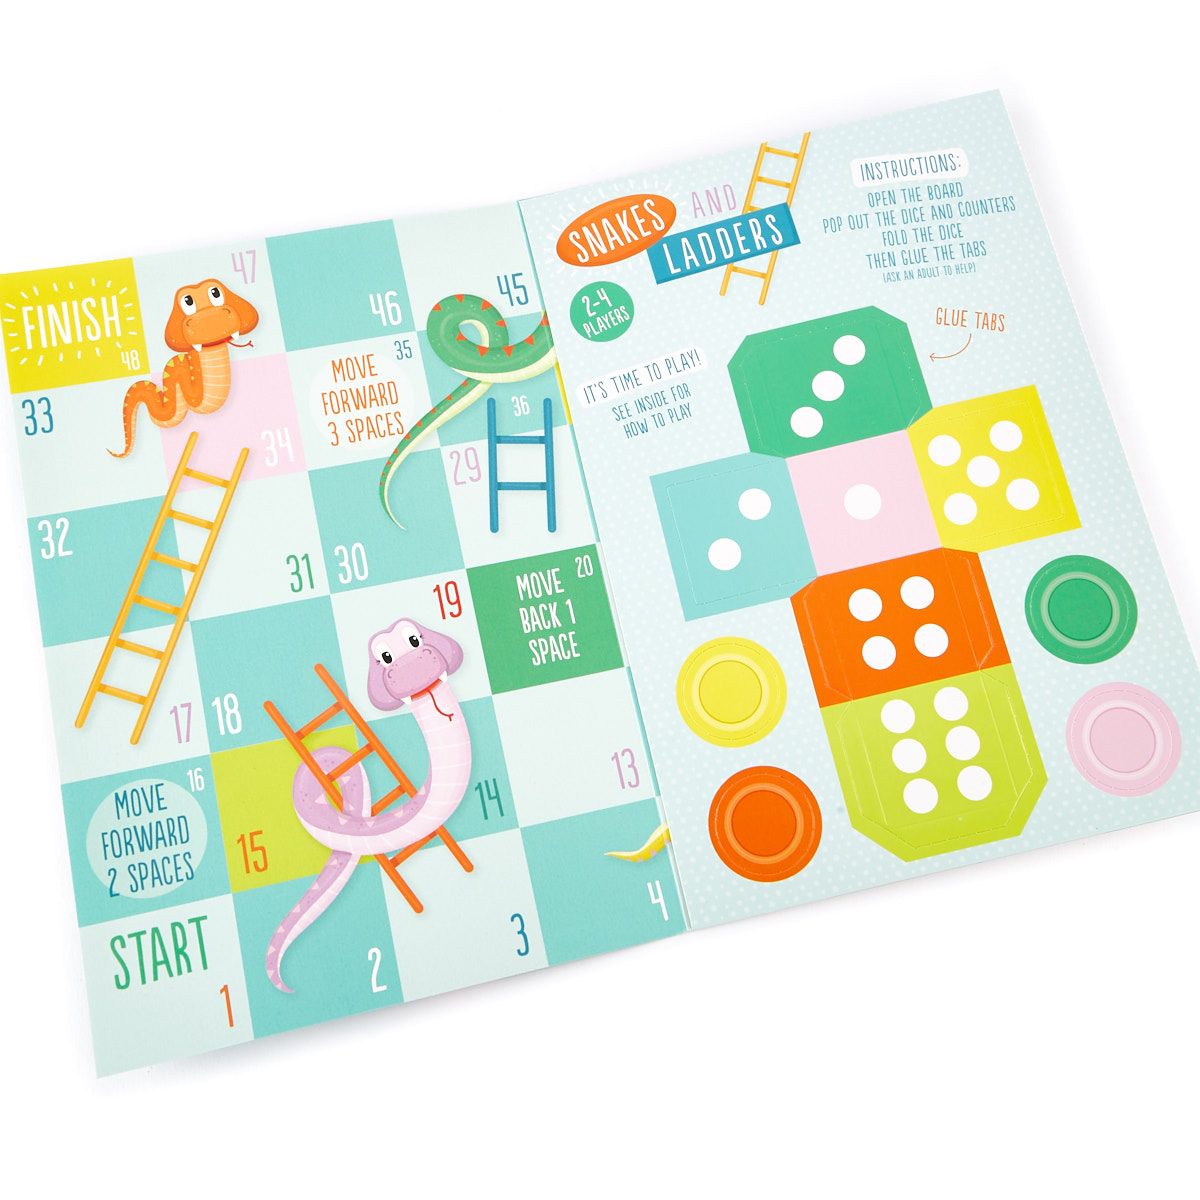 5th Birthday Card - Snakes & Ladders